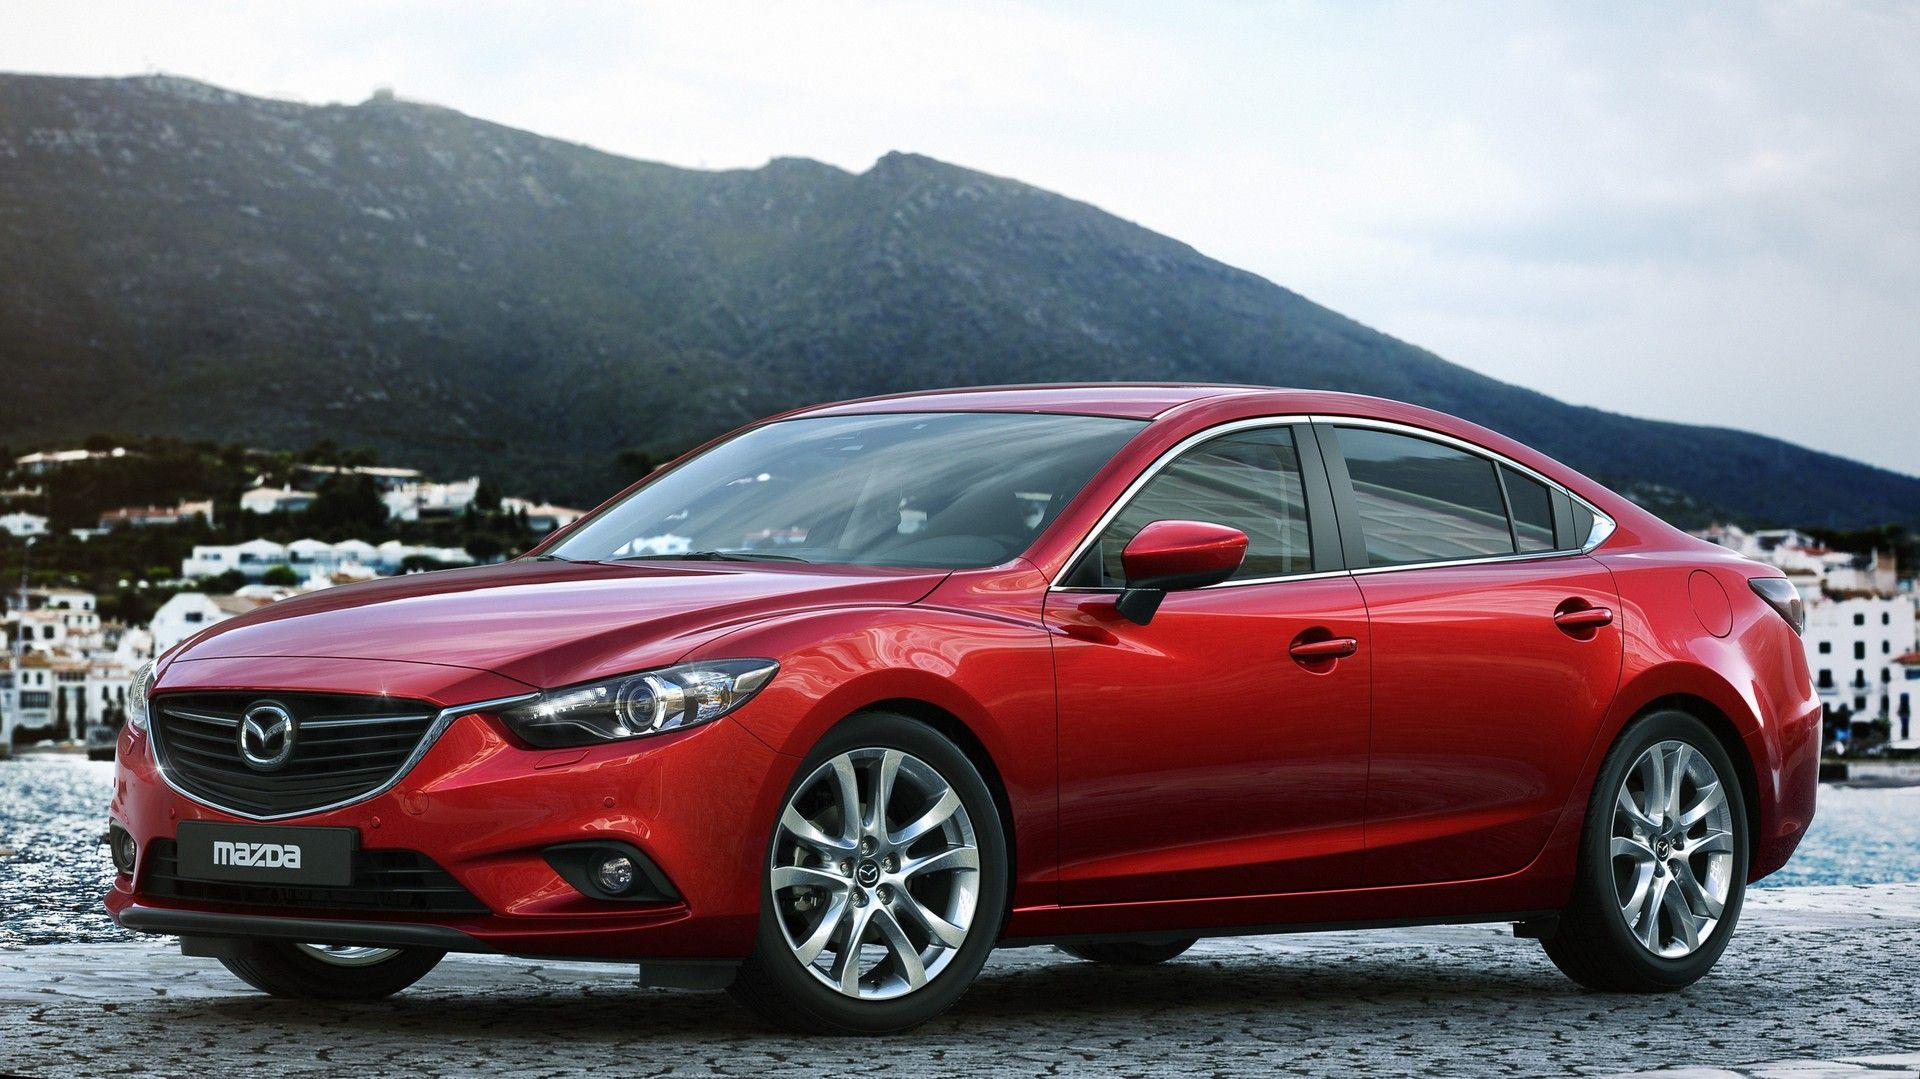 1920x1079px Top Mazda 6 wallpaper for free 94